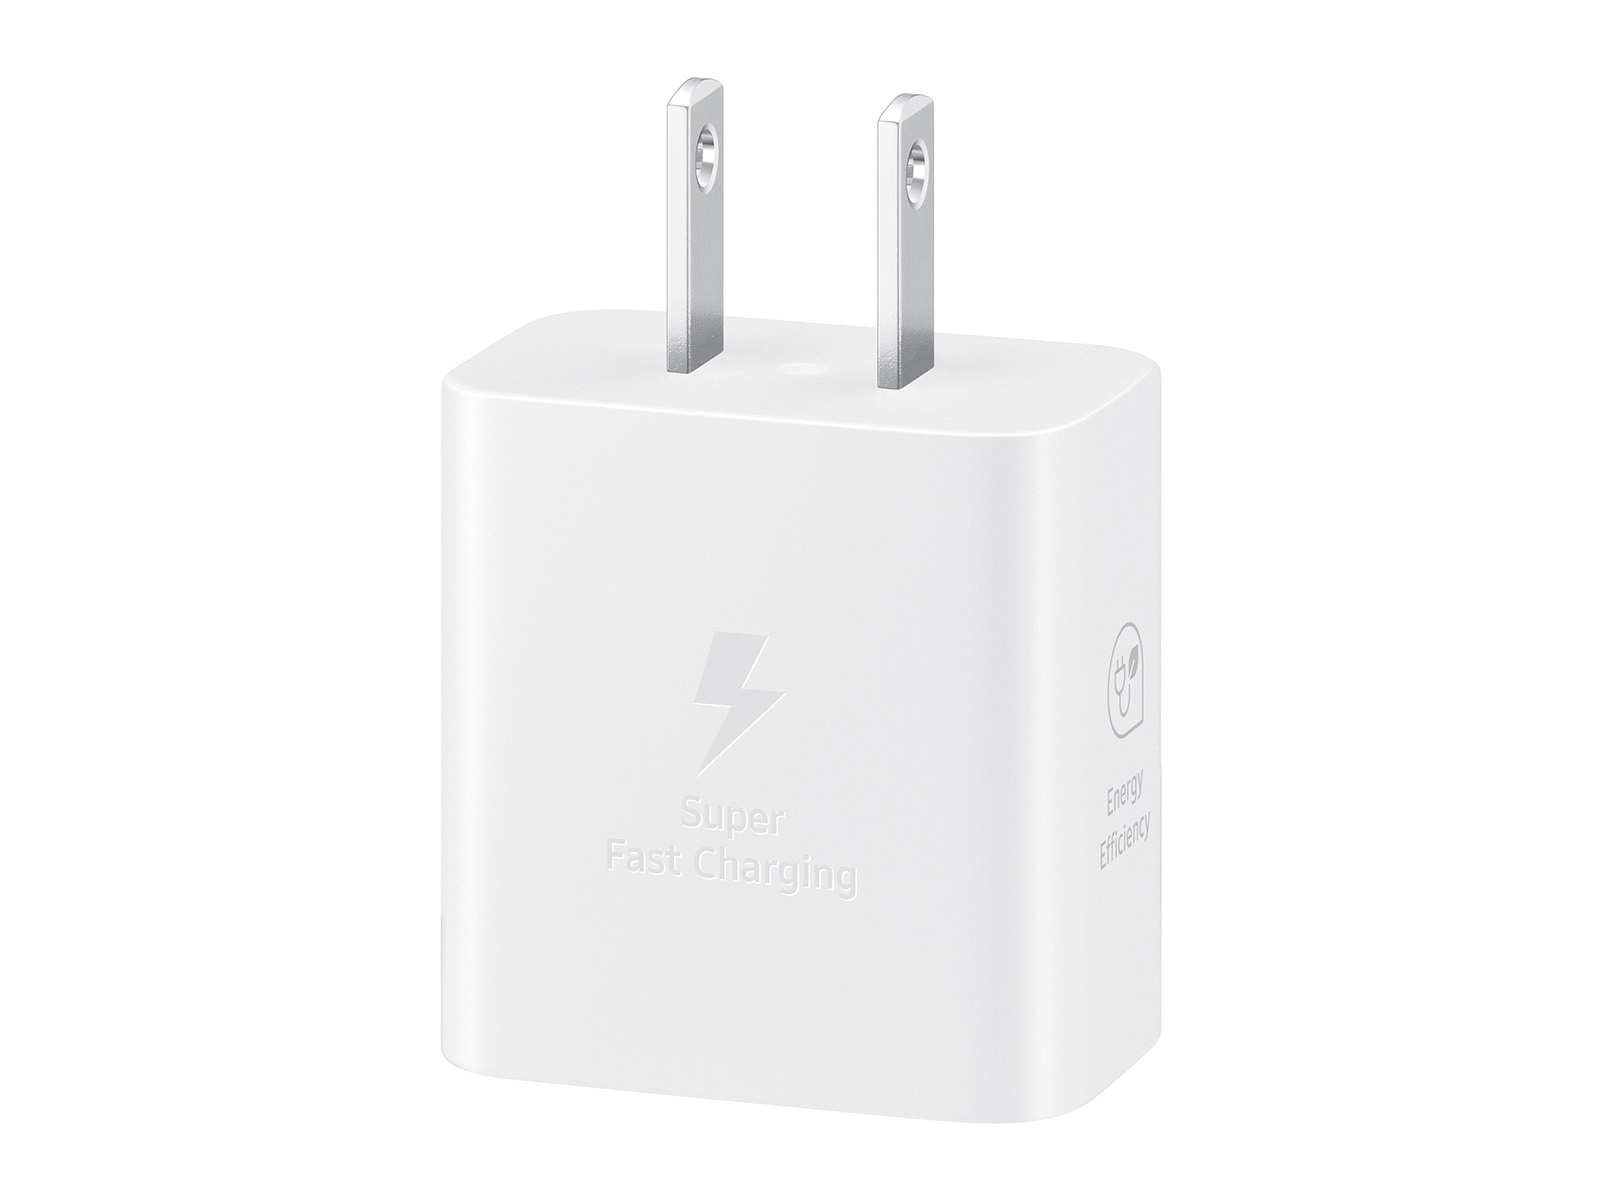 Sony Xperia L3 USB-C Super Fast Charging Wall Charger-25W PD Charger  Adapter with Type-C Cable - White